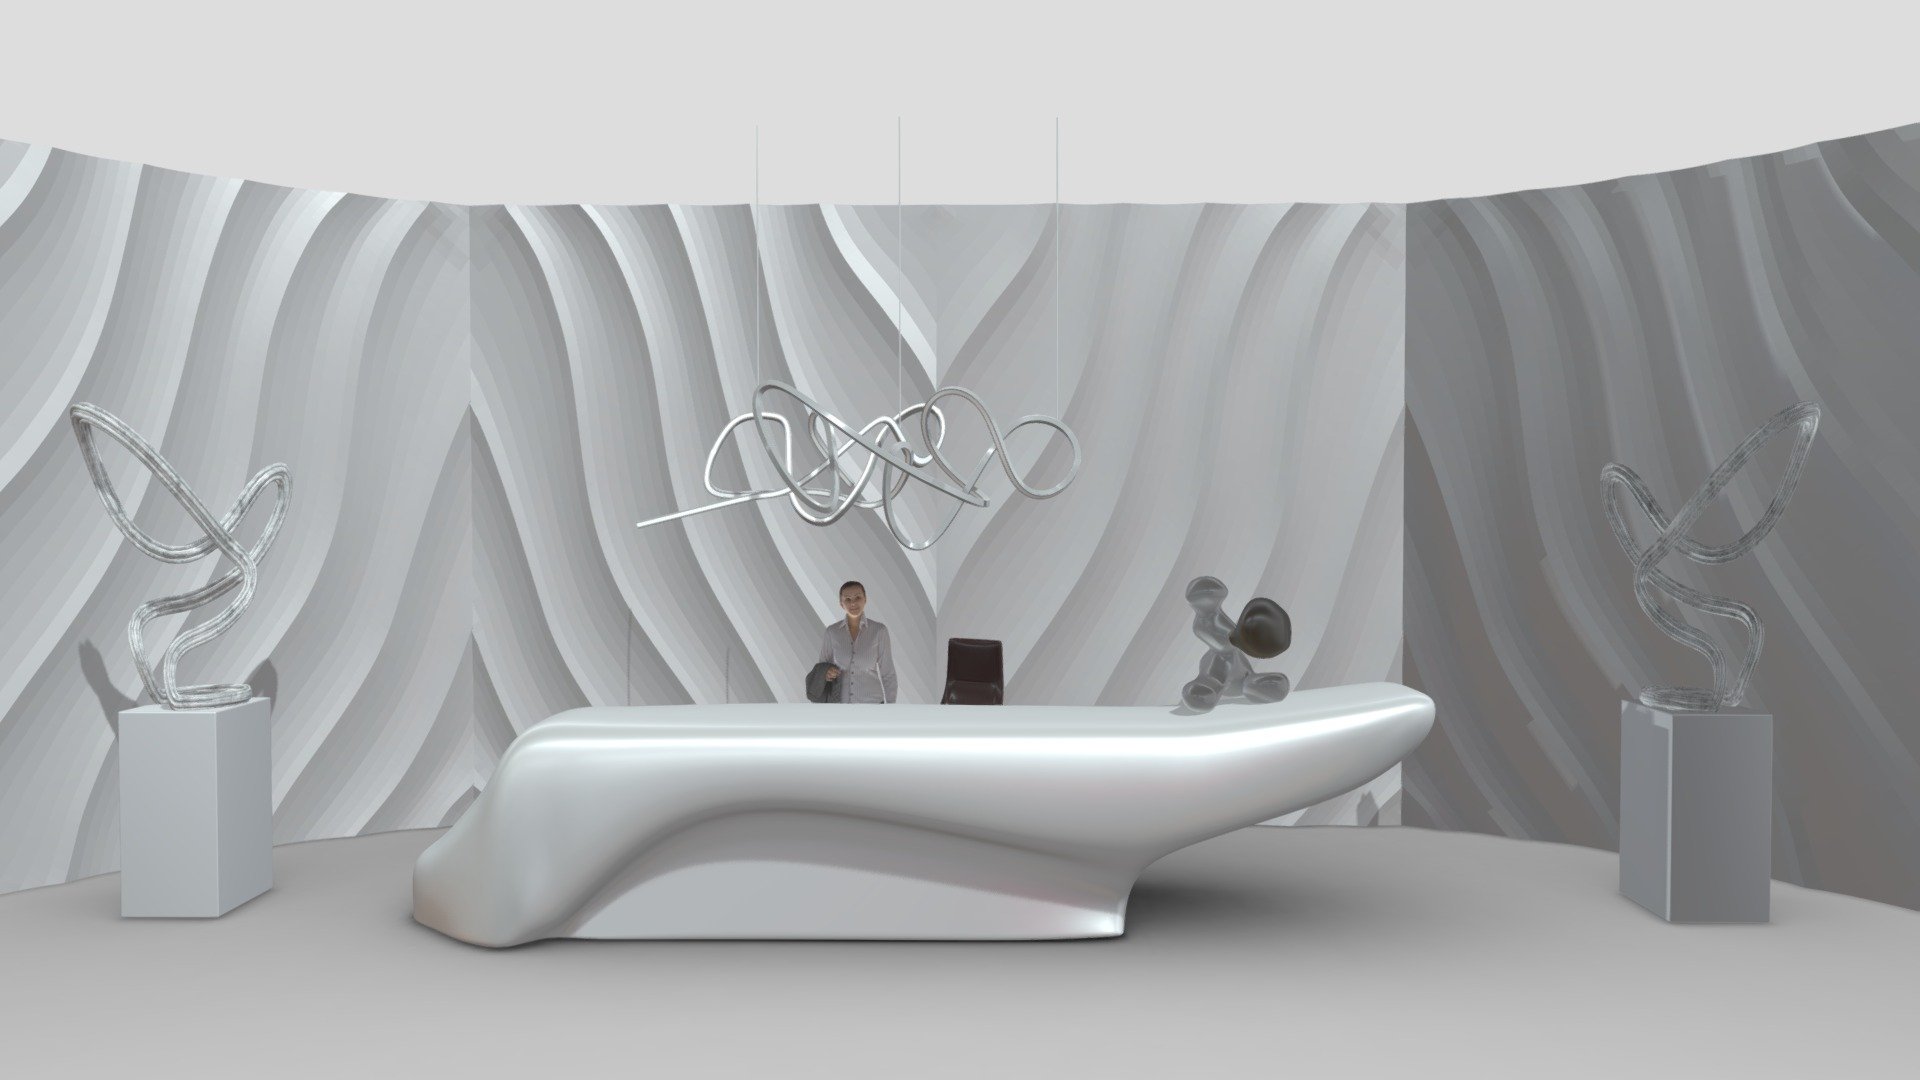 Reception Desk - 036

Native Format File : 3Ds Max 2020 &ndash; Rendering by Vray Next

File save as : 3Ds Max 2017 with converted all object to Editable Poly.

Exporting Formats :
Autodesk FBX ( .fbx ) and OBJ ( .obj &amp; .mtl ).

All 7 Texture maps are include as JPG.

Support 24/7 3d model